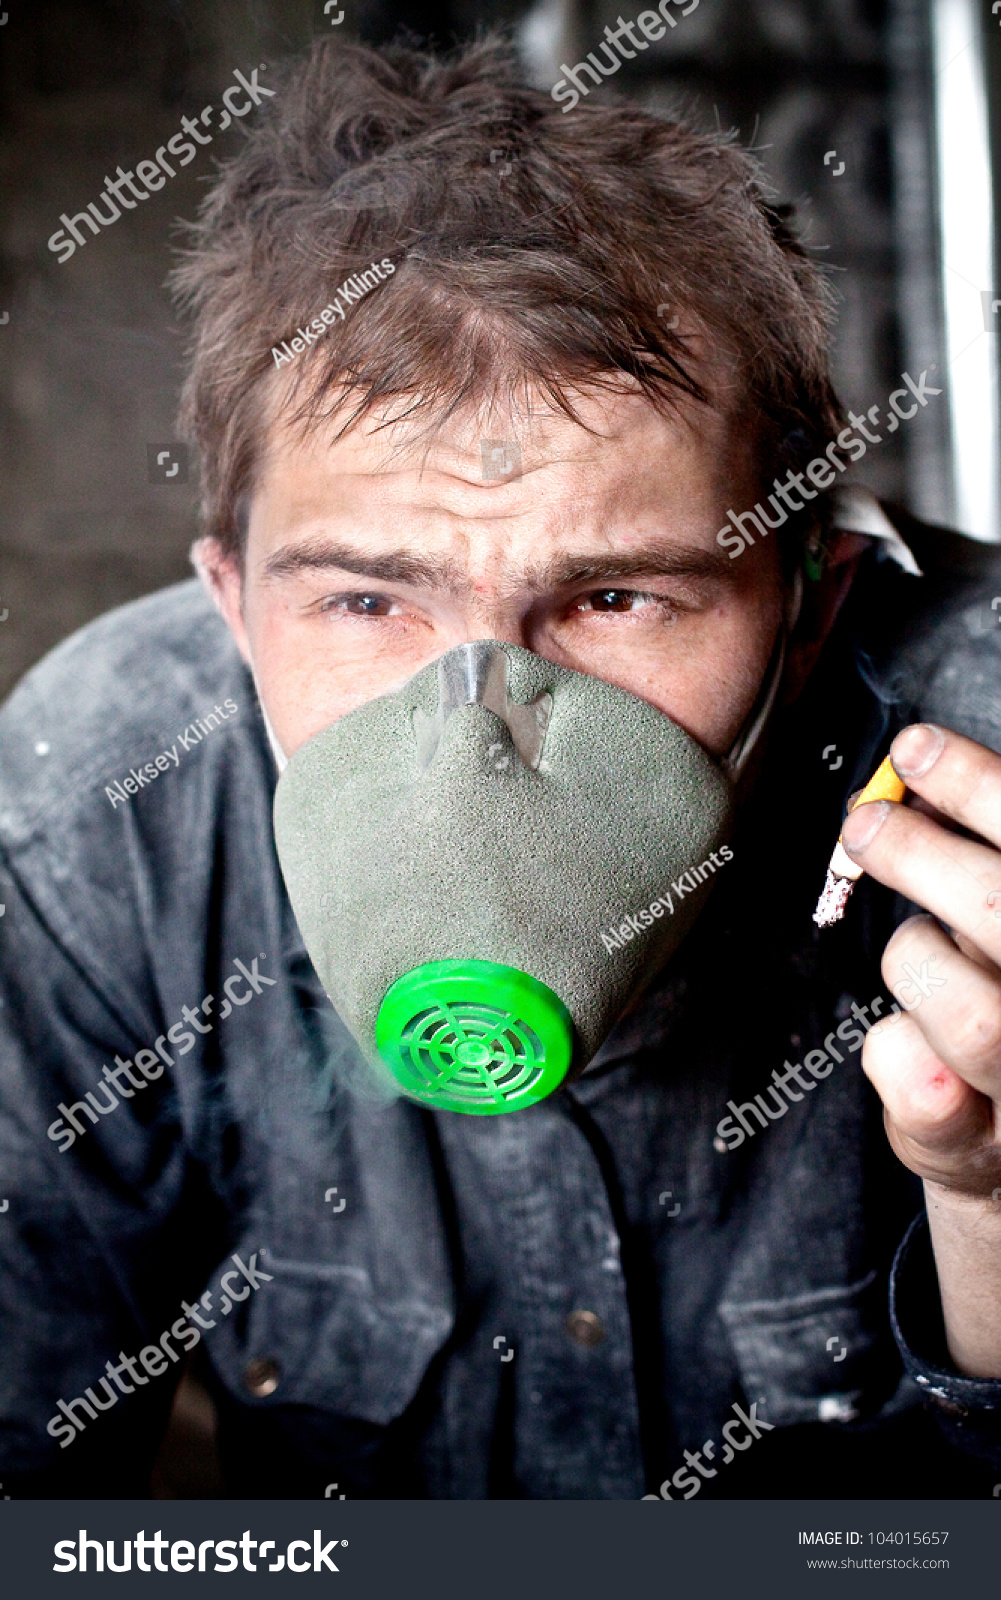 Portrait Of Dirty Worker In Gas Mask Smoking Cigarette Stock Photo ...